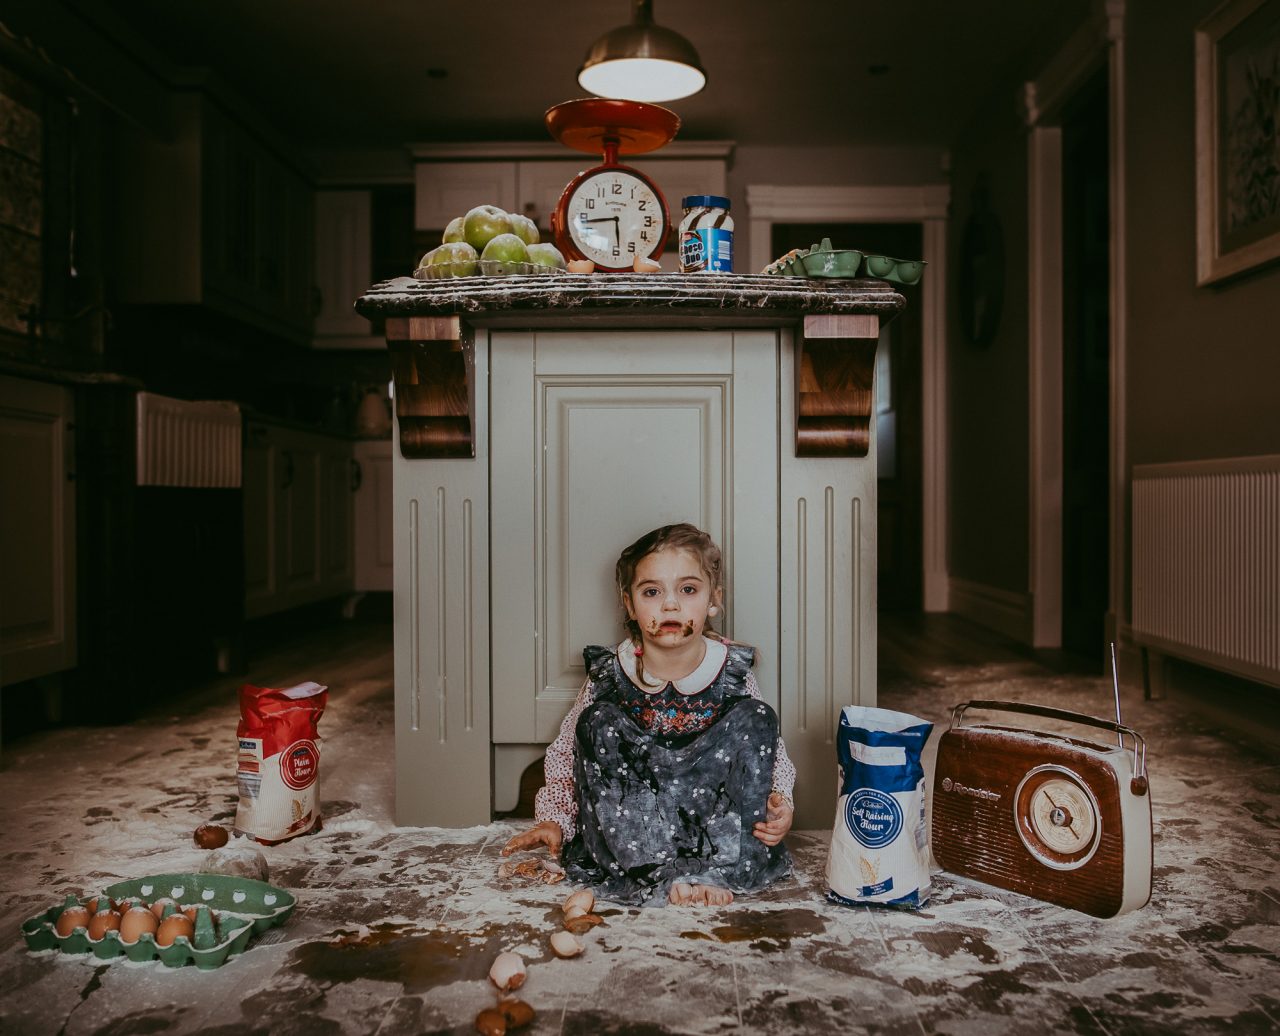 Kitchen scene of a little girl sat on the floor, staring into the camera, surrounded by flour and other baking goods